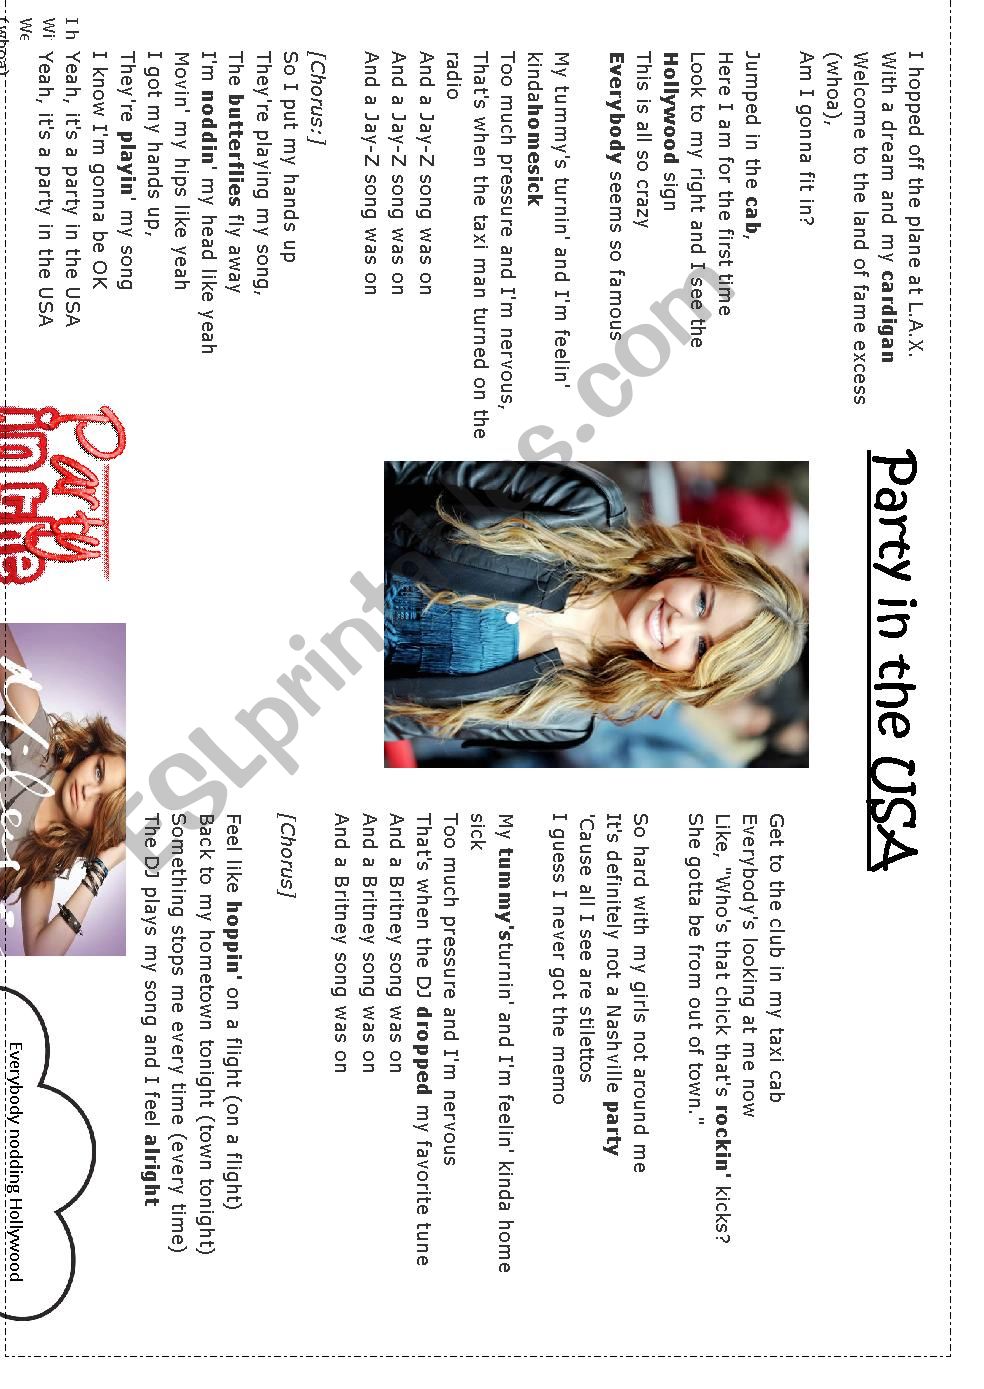 Party in the USA, Miley Cyrus worksheet